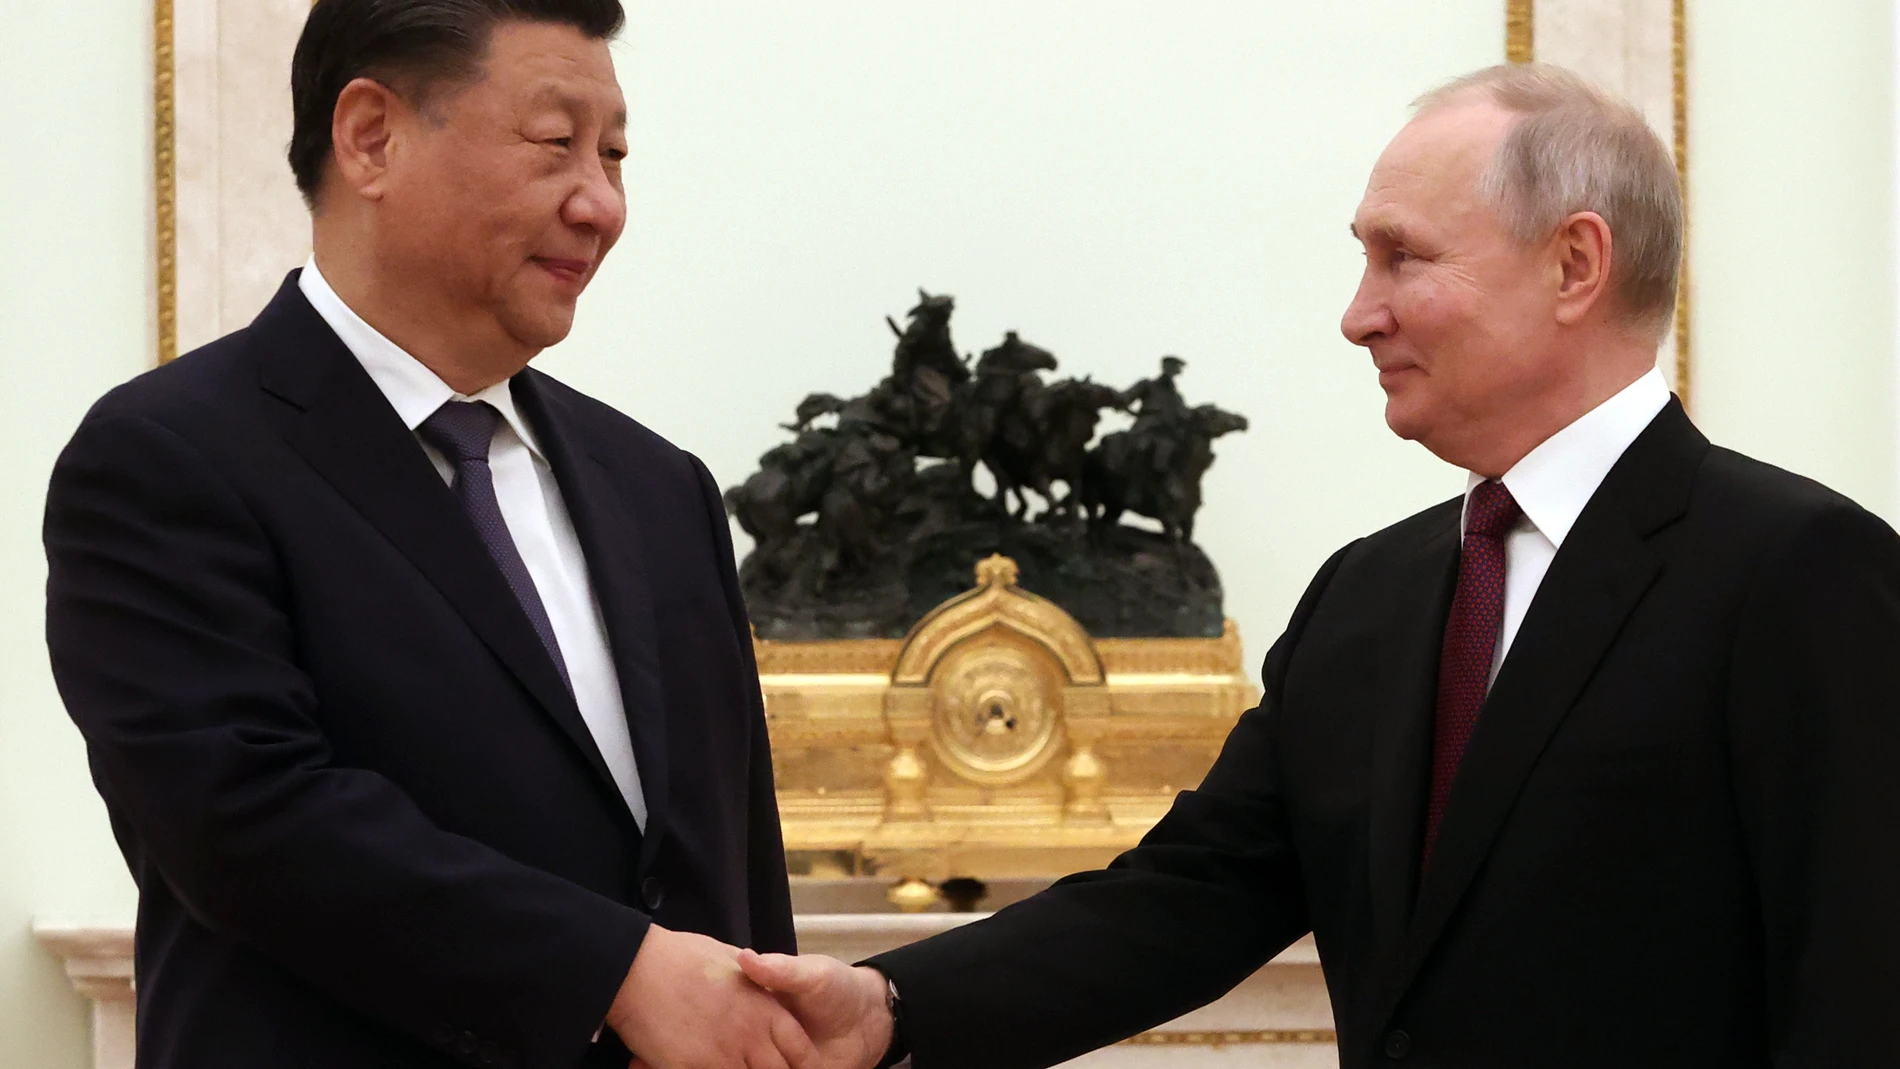 Moscow (Russian Federation), 19/03/2023.- Russian President Vladimir Putin (R) shakes hands with Chinese President Xi Jinping (L) during their meeting in Moscow Kremlin in Moscow, Russia, 20 March 2023. Chinese President Xi Jinping arrived in Moscow on a three-day visit, which will last from March 20 to 22, according to Russian and Chinese state agencies. Xi Jinping visits Russia on improving joint partnership and developing key areas of Russian-Chinese economic cooperation. (Rusia, Moscú) EFE/EPA/SERGEI KARPUHIN / SPUTNIK / KREMLIN POOL MANDATORY CREDIT 